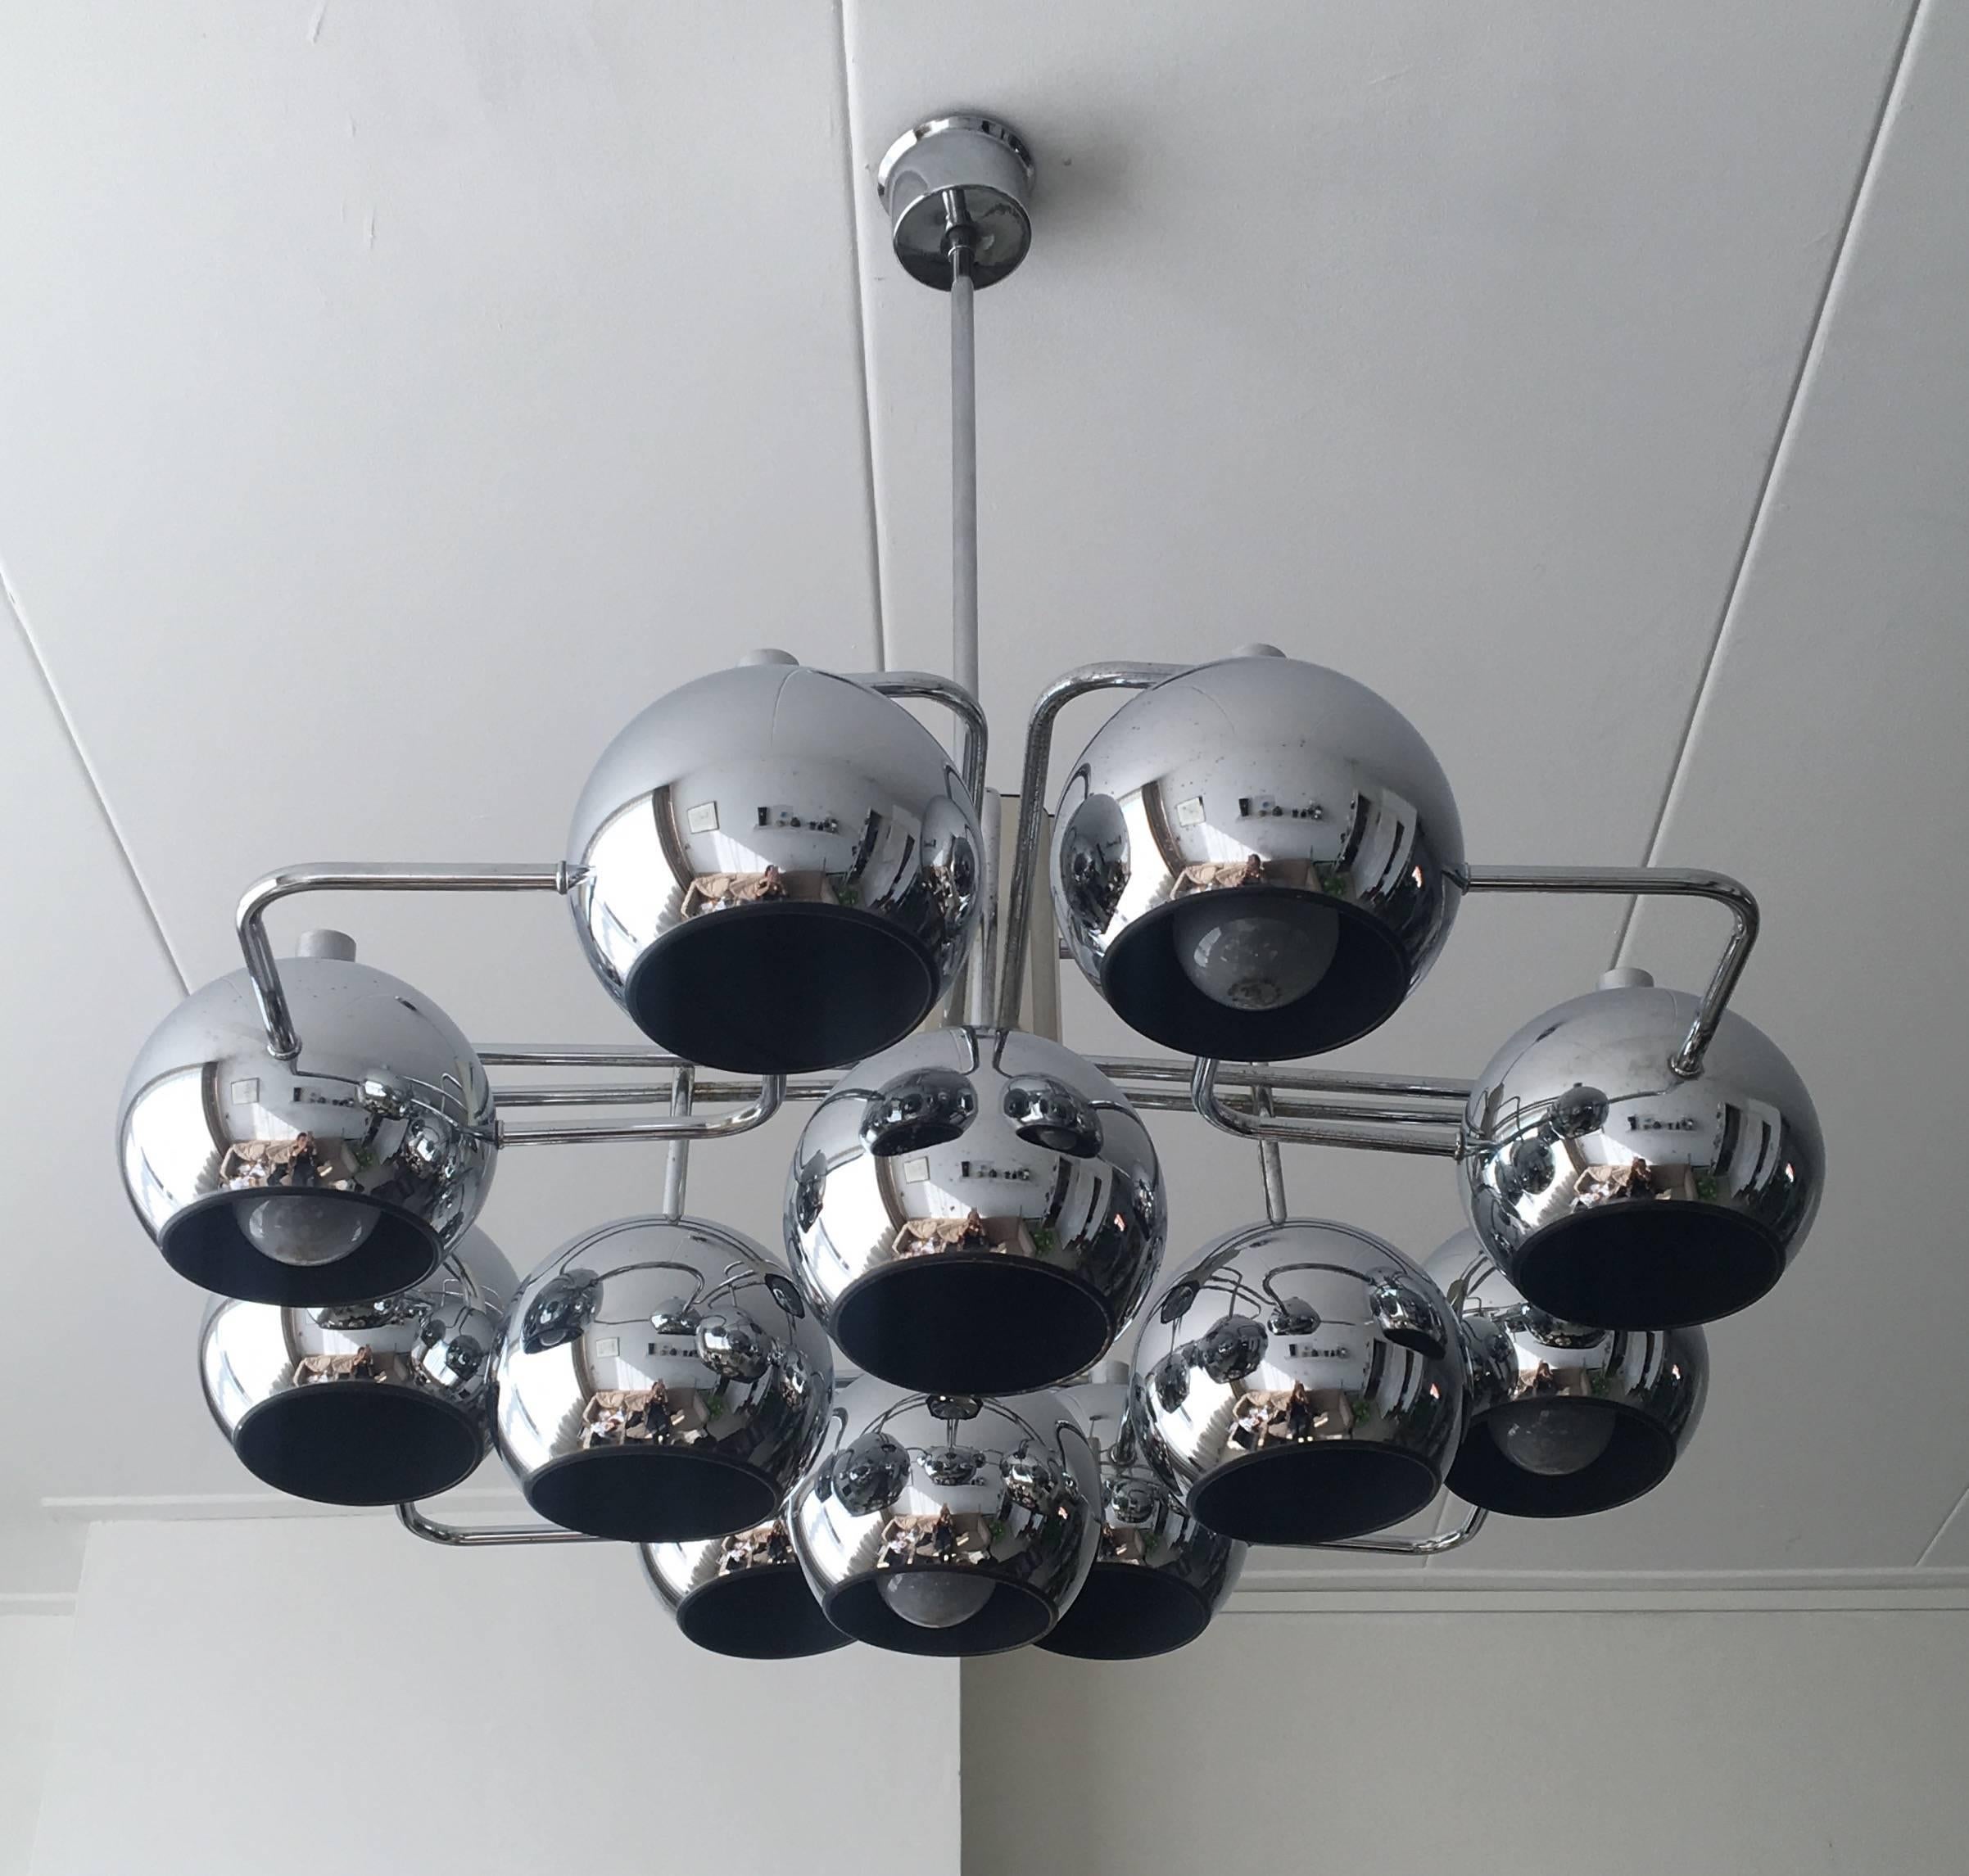 This stunning lamp comes with 12 chrome globe's attached to a geometric base. It's design can be attributed to Sciolari and was manufactured in Belgium by Boulanger, circa 1960s.
This piece remains in a very good vintage condition, with wear